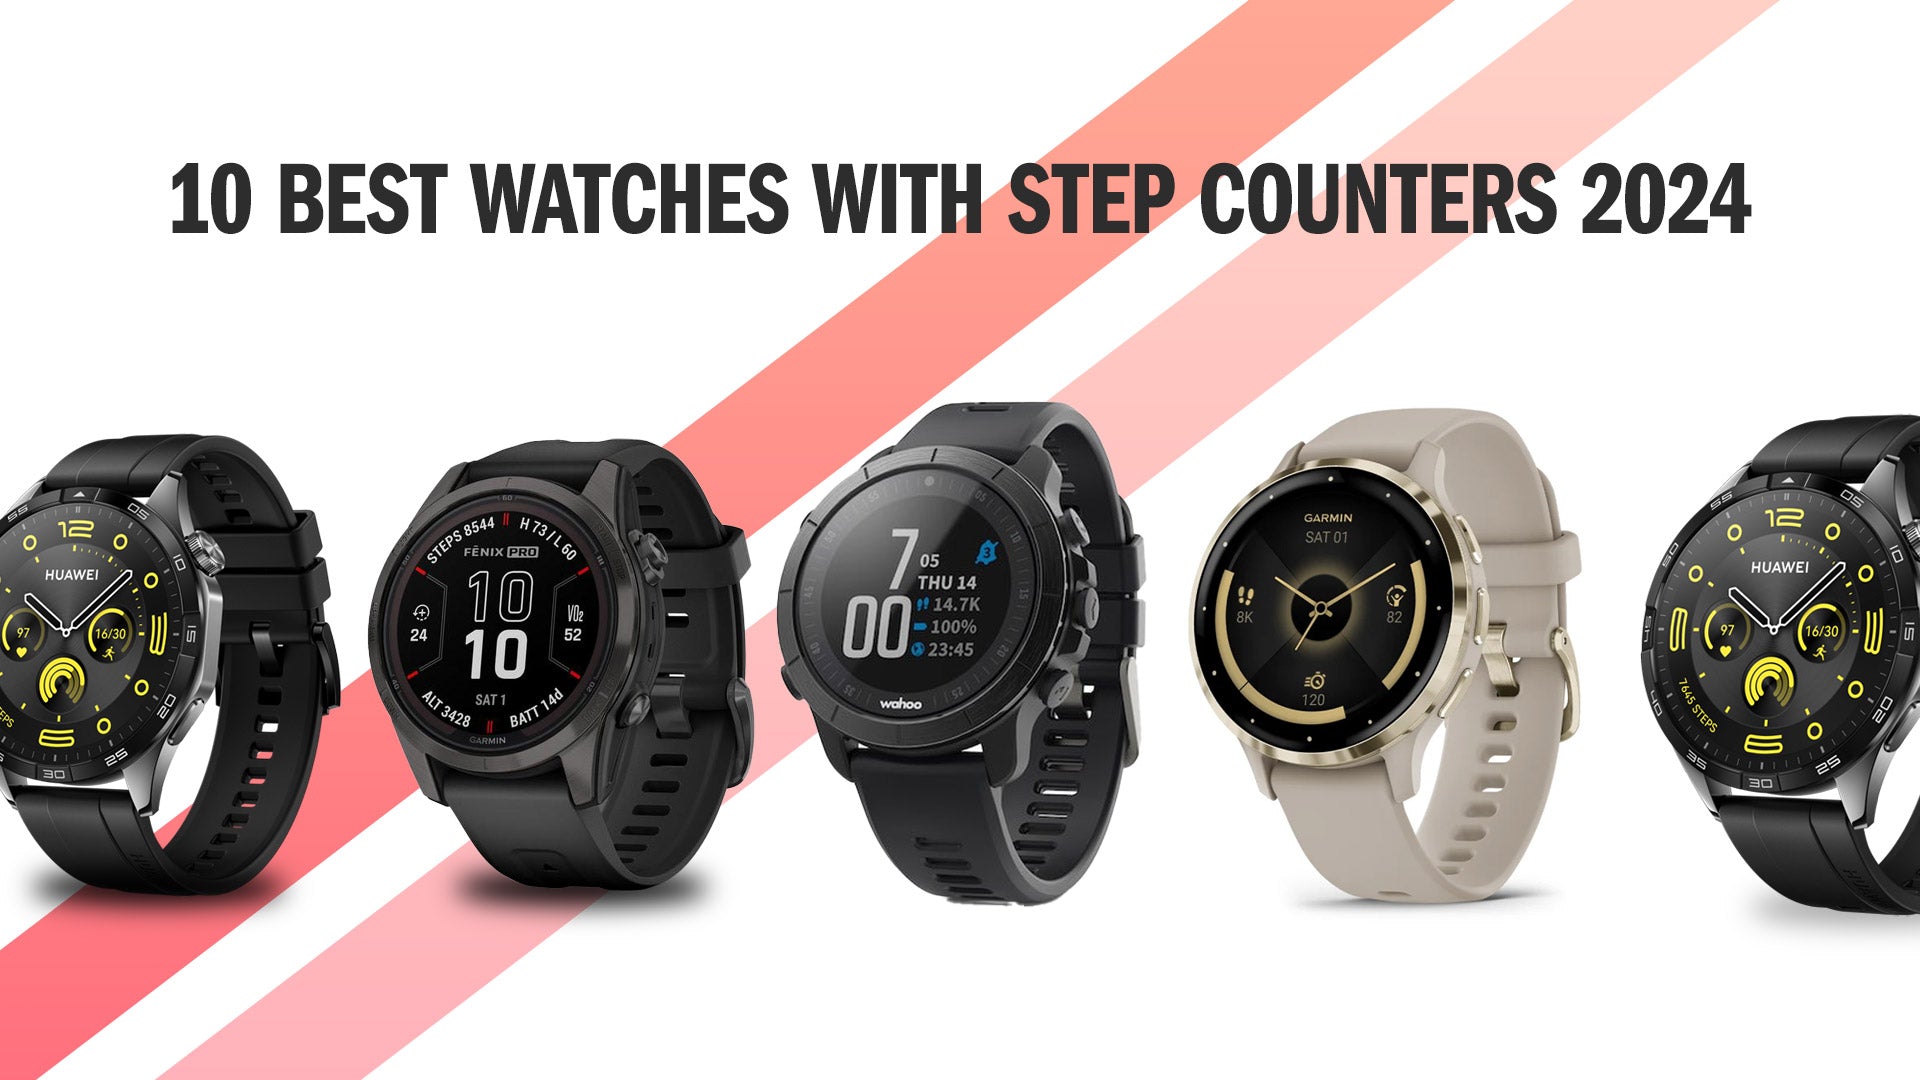 The 10 Best Watches With Step Counters 2024